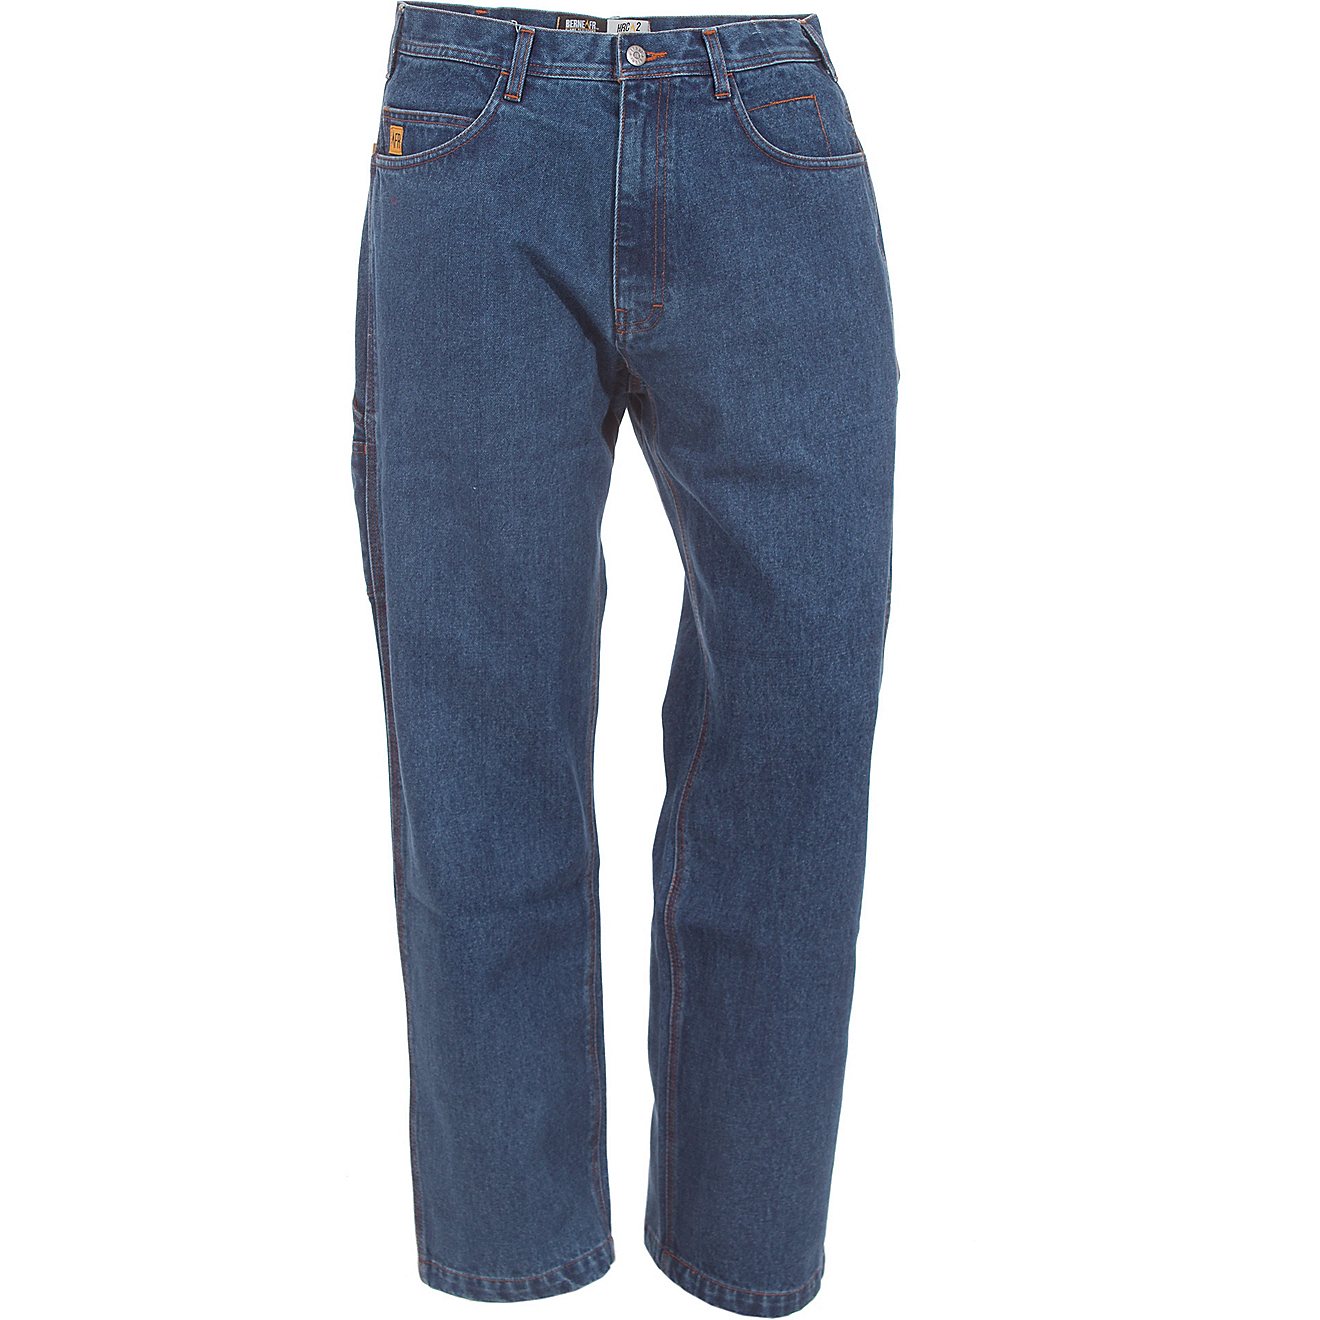 Berne FR Carpenter Jeans | Free Shipping at Academy